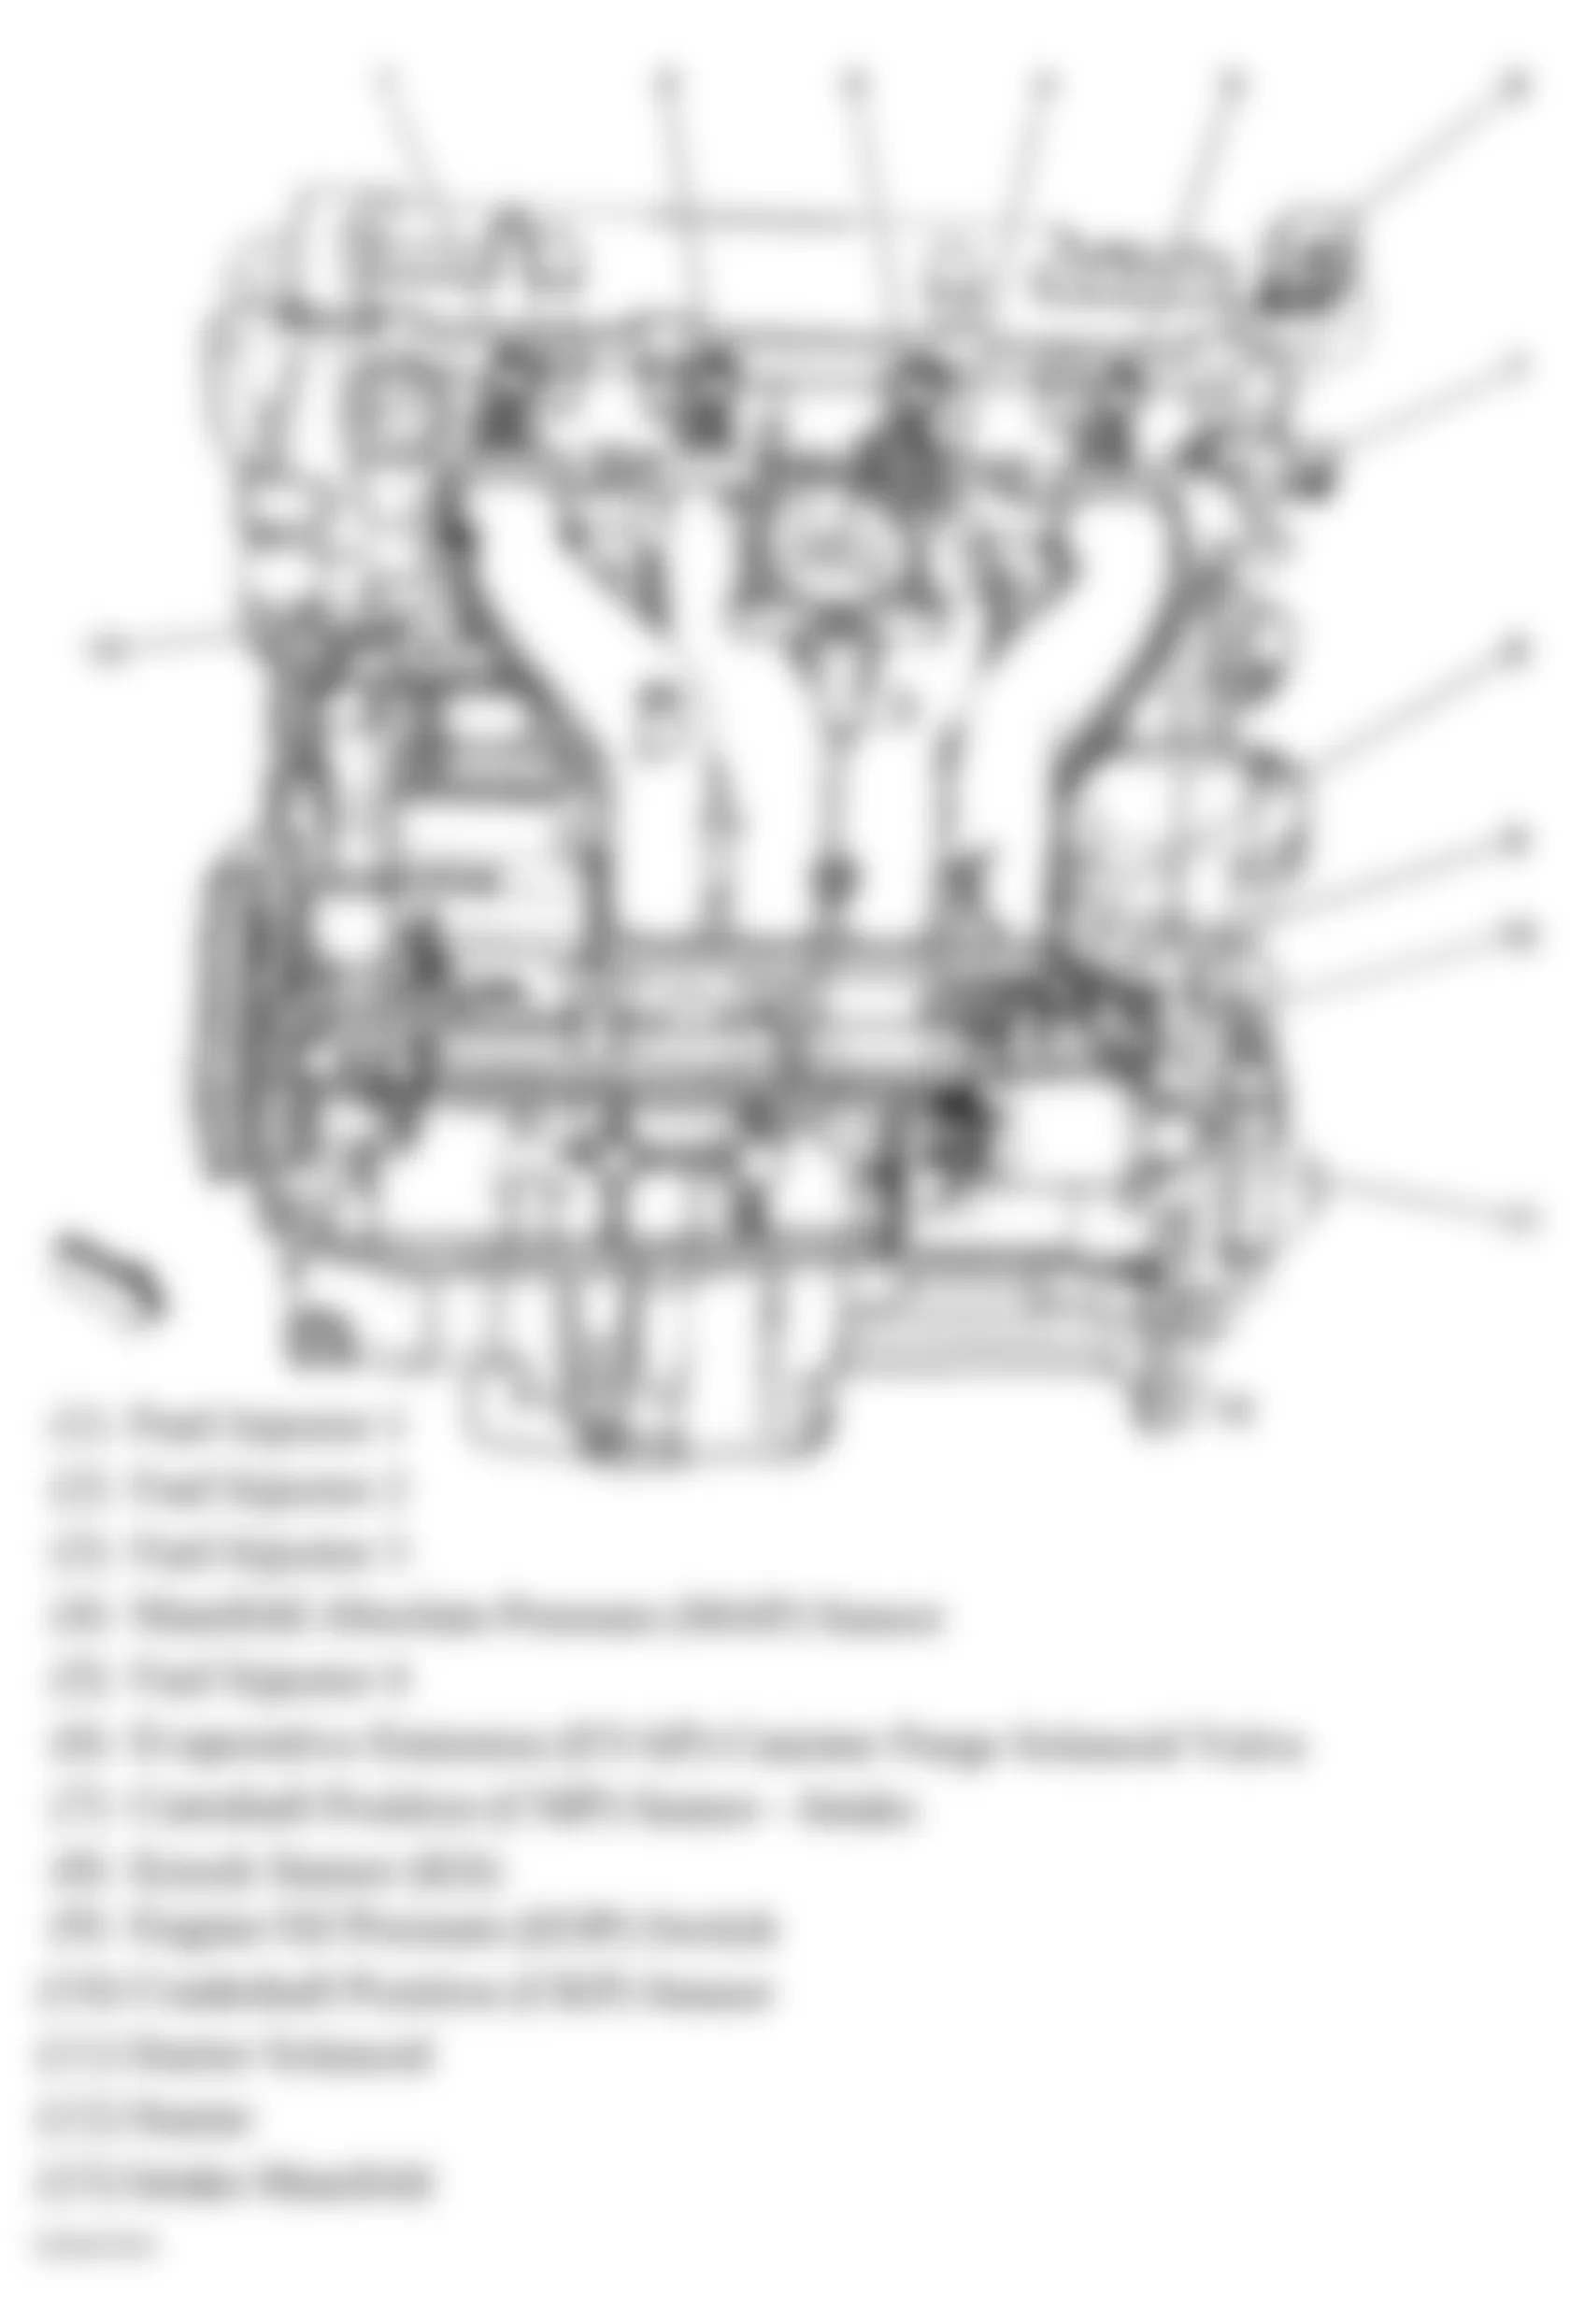 Chevrolet HHR LS 2008 - Component Locations -  Left Side Of Engine (2.4L)